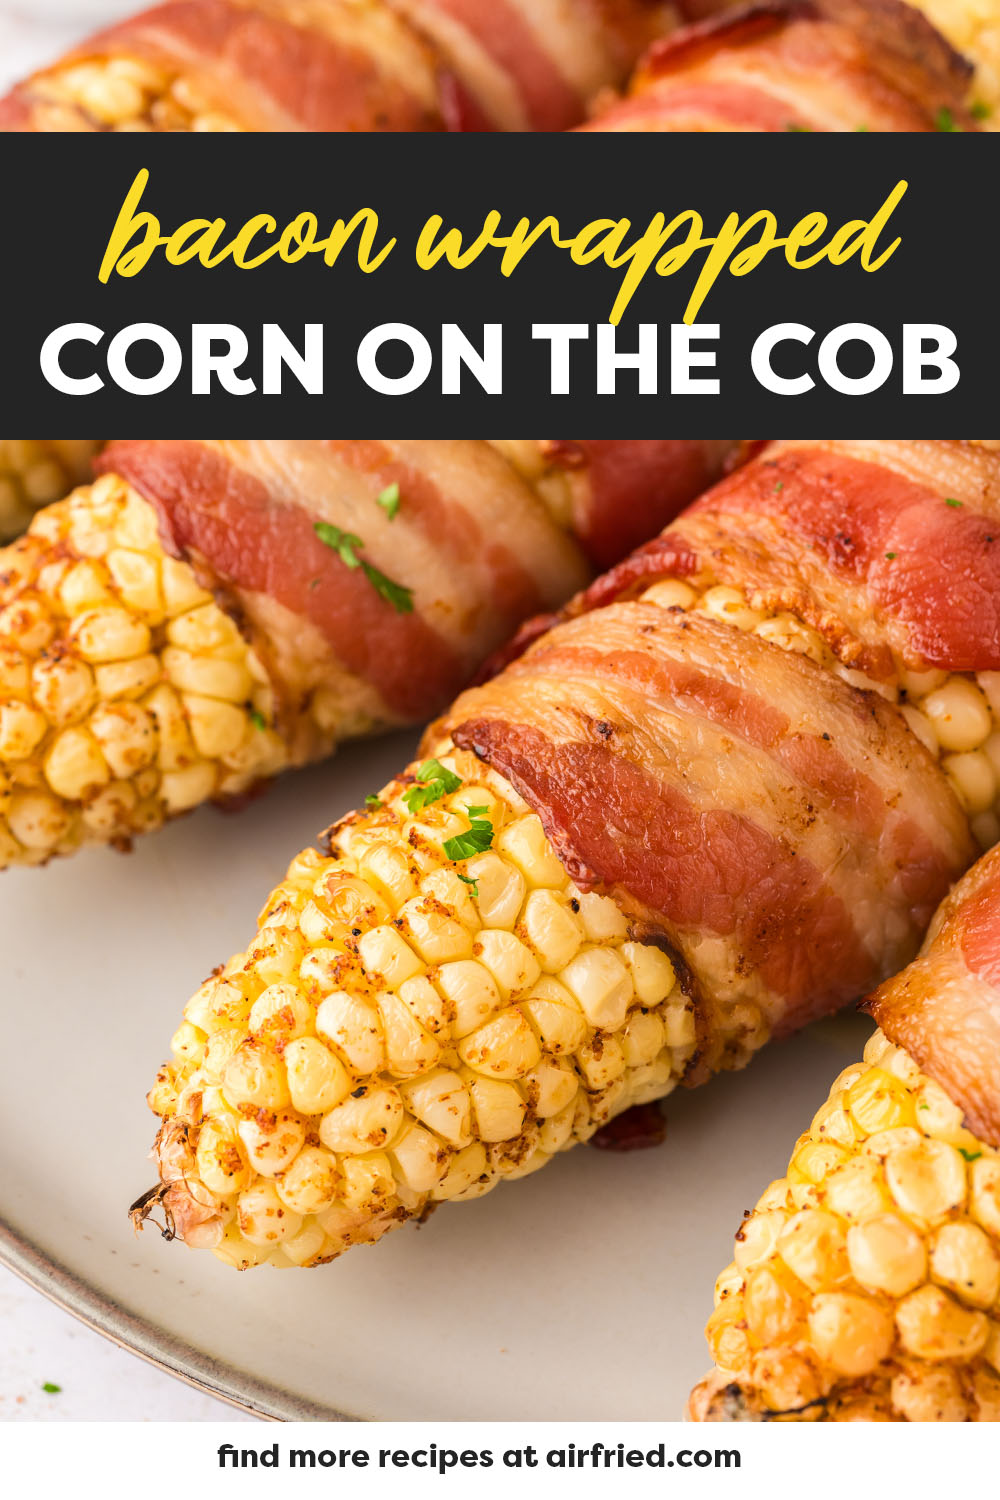 This corn on the cob is seasoned, wrapped in bacon, and cooked all at once in the air fryer.  The result is a super flavorful, crisp texture corn on the cob!